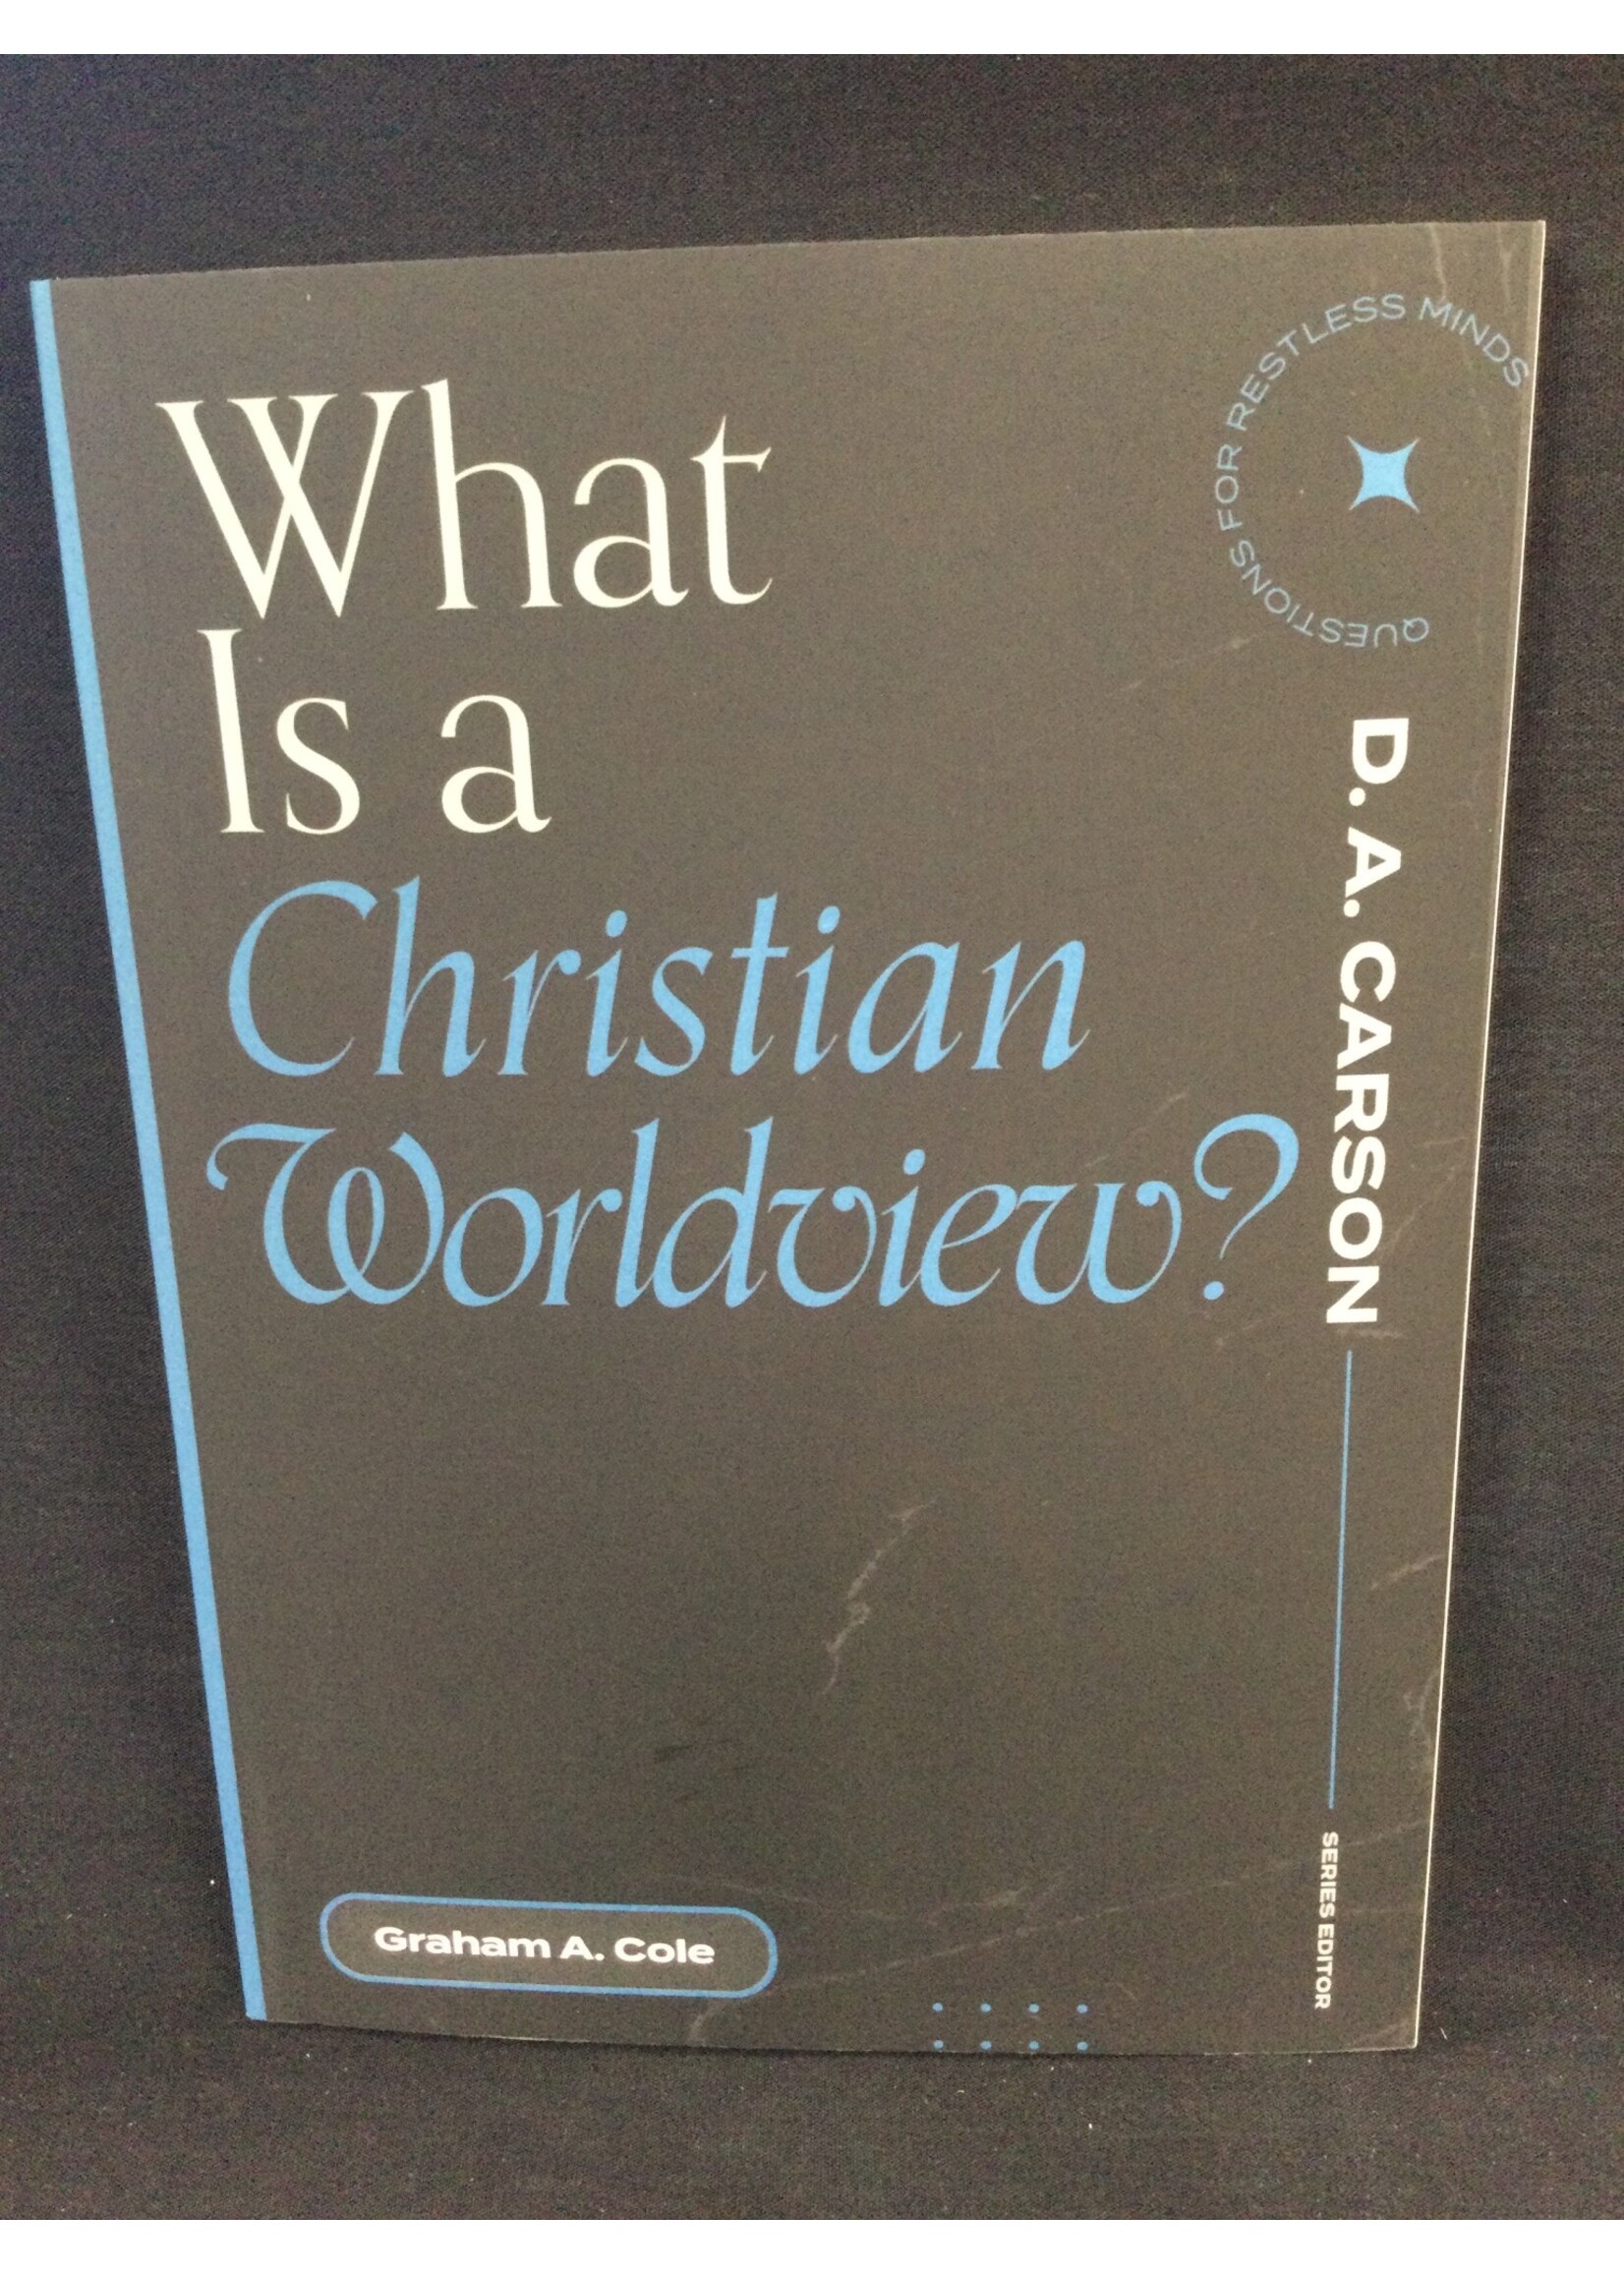 WHAT IS A CHRISTIAN WORLDVIEW